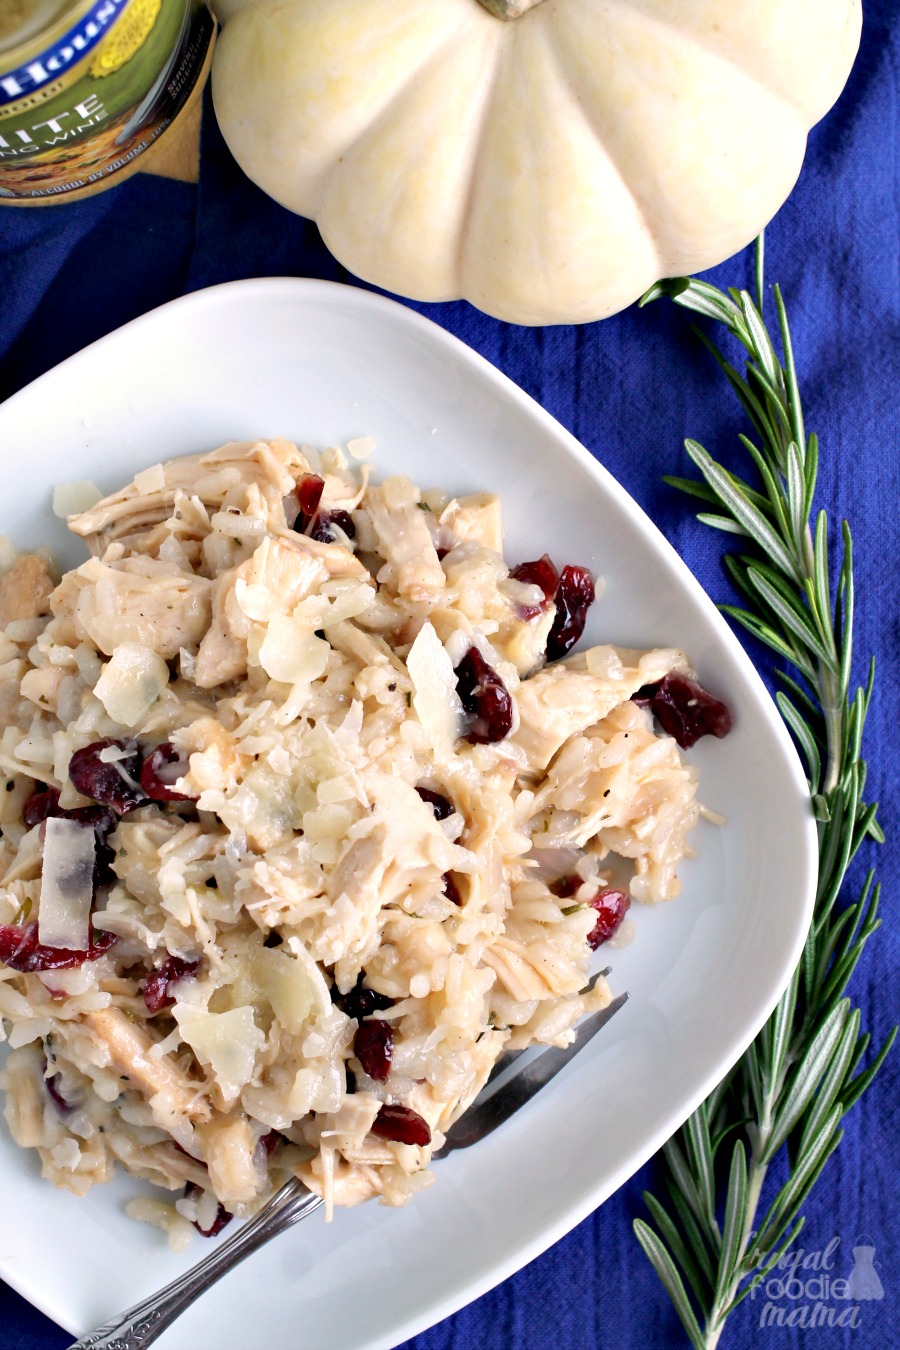 Frugal Foodie Mama: Holiday Turkey & Cranberry Risotto